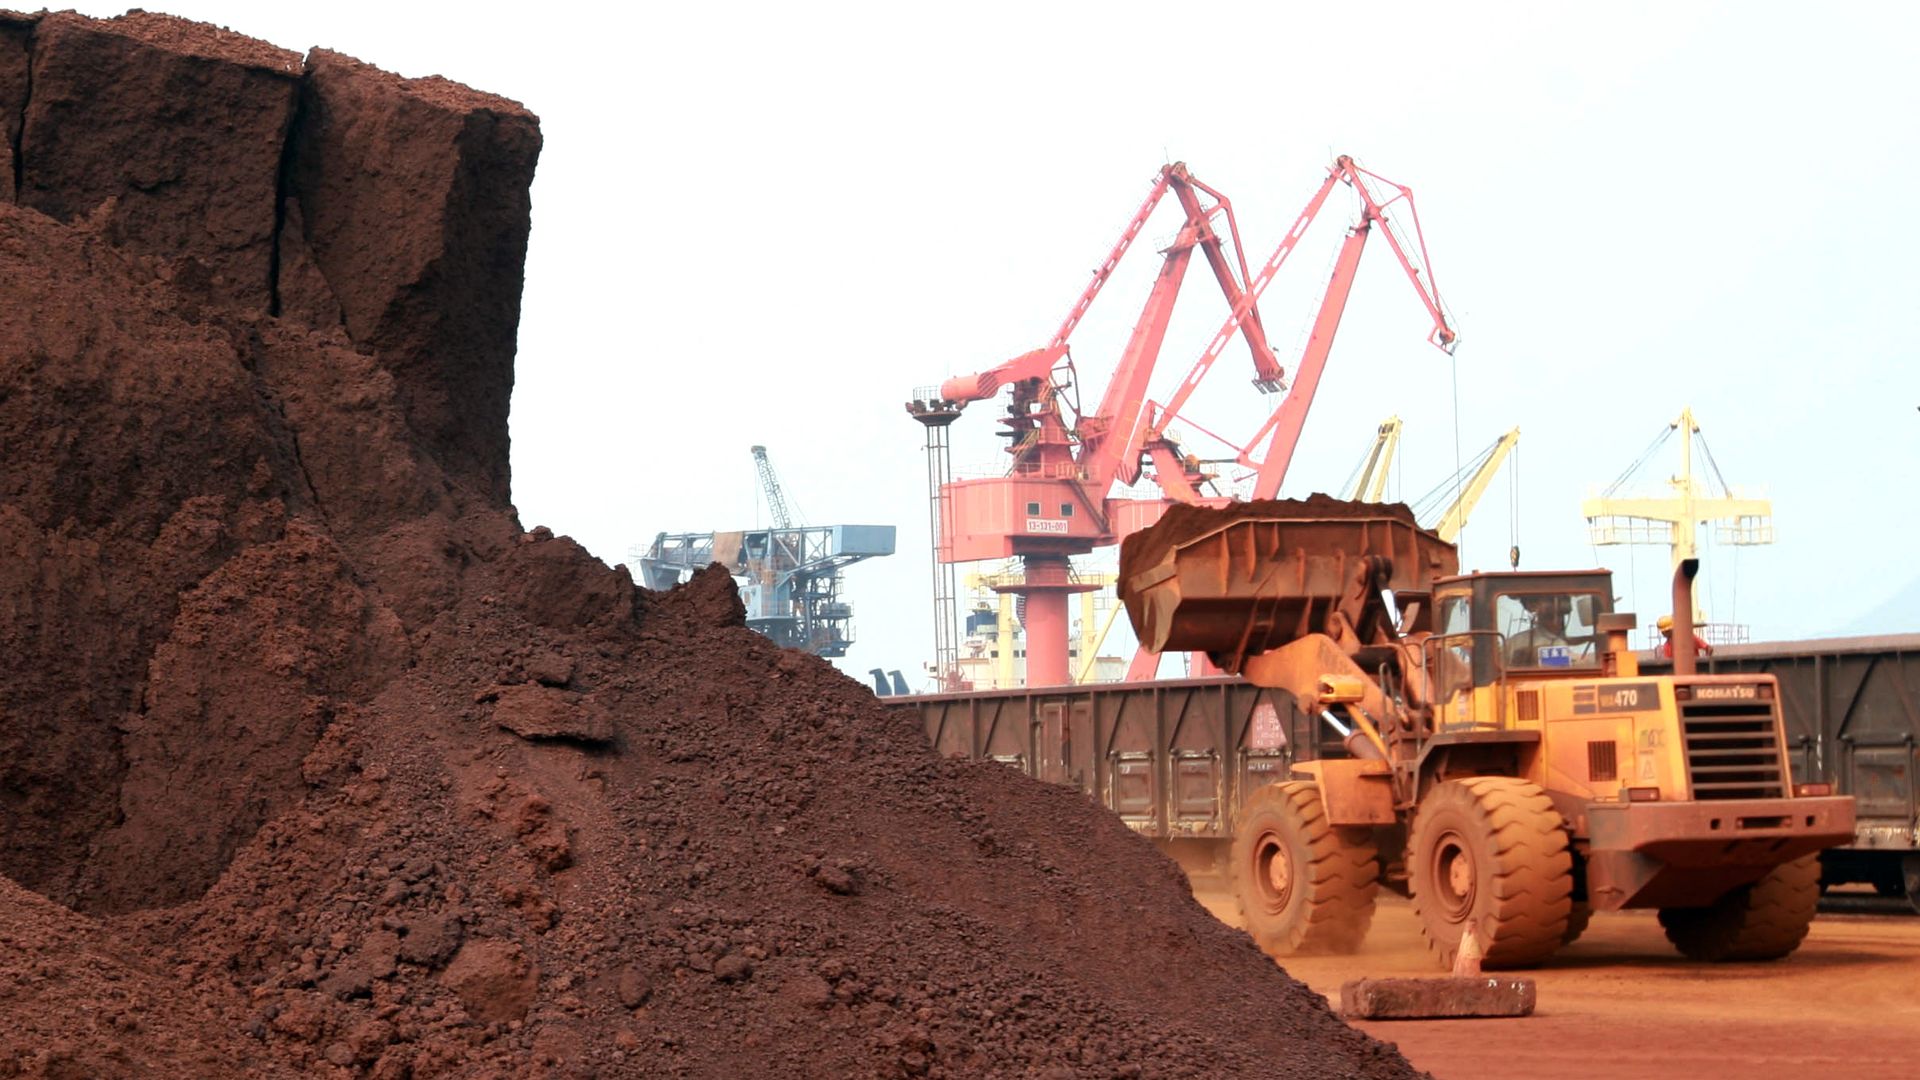 A front loader shifting soil containing rare earth minerals in a port in Lianyungang, China, in September 2010.